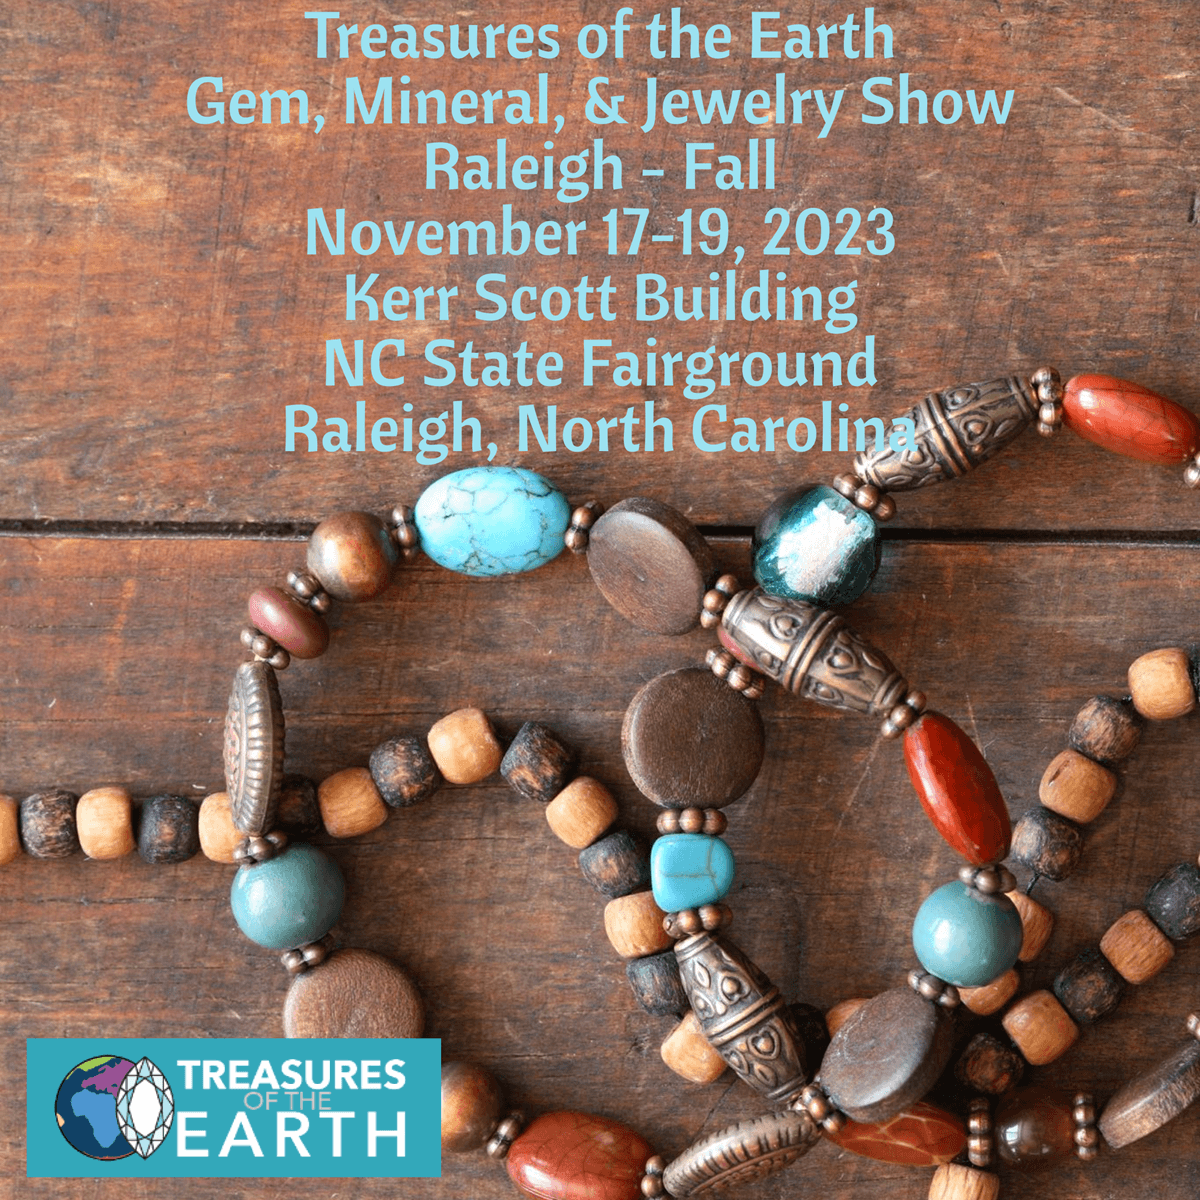 Treasures of the Earth Gem, Mineral, & Jewelry Show Raleigh Fall 2023